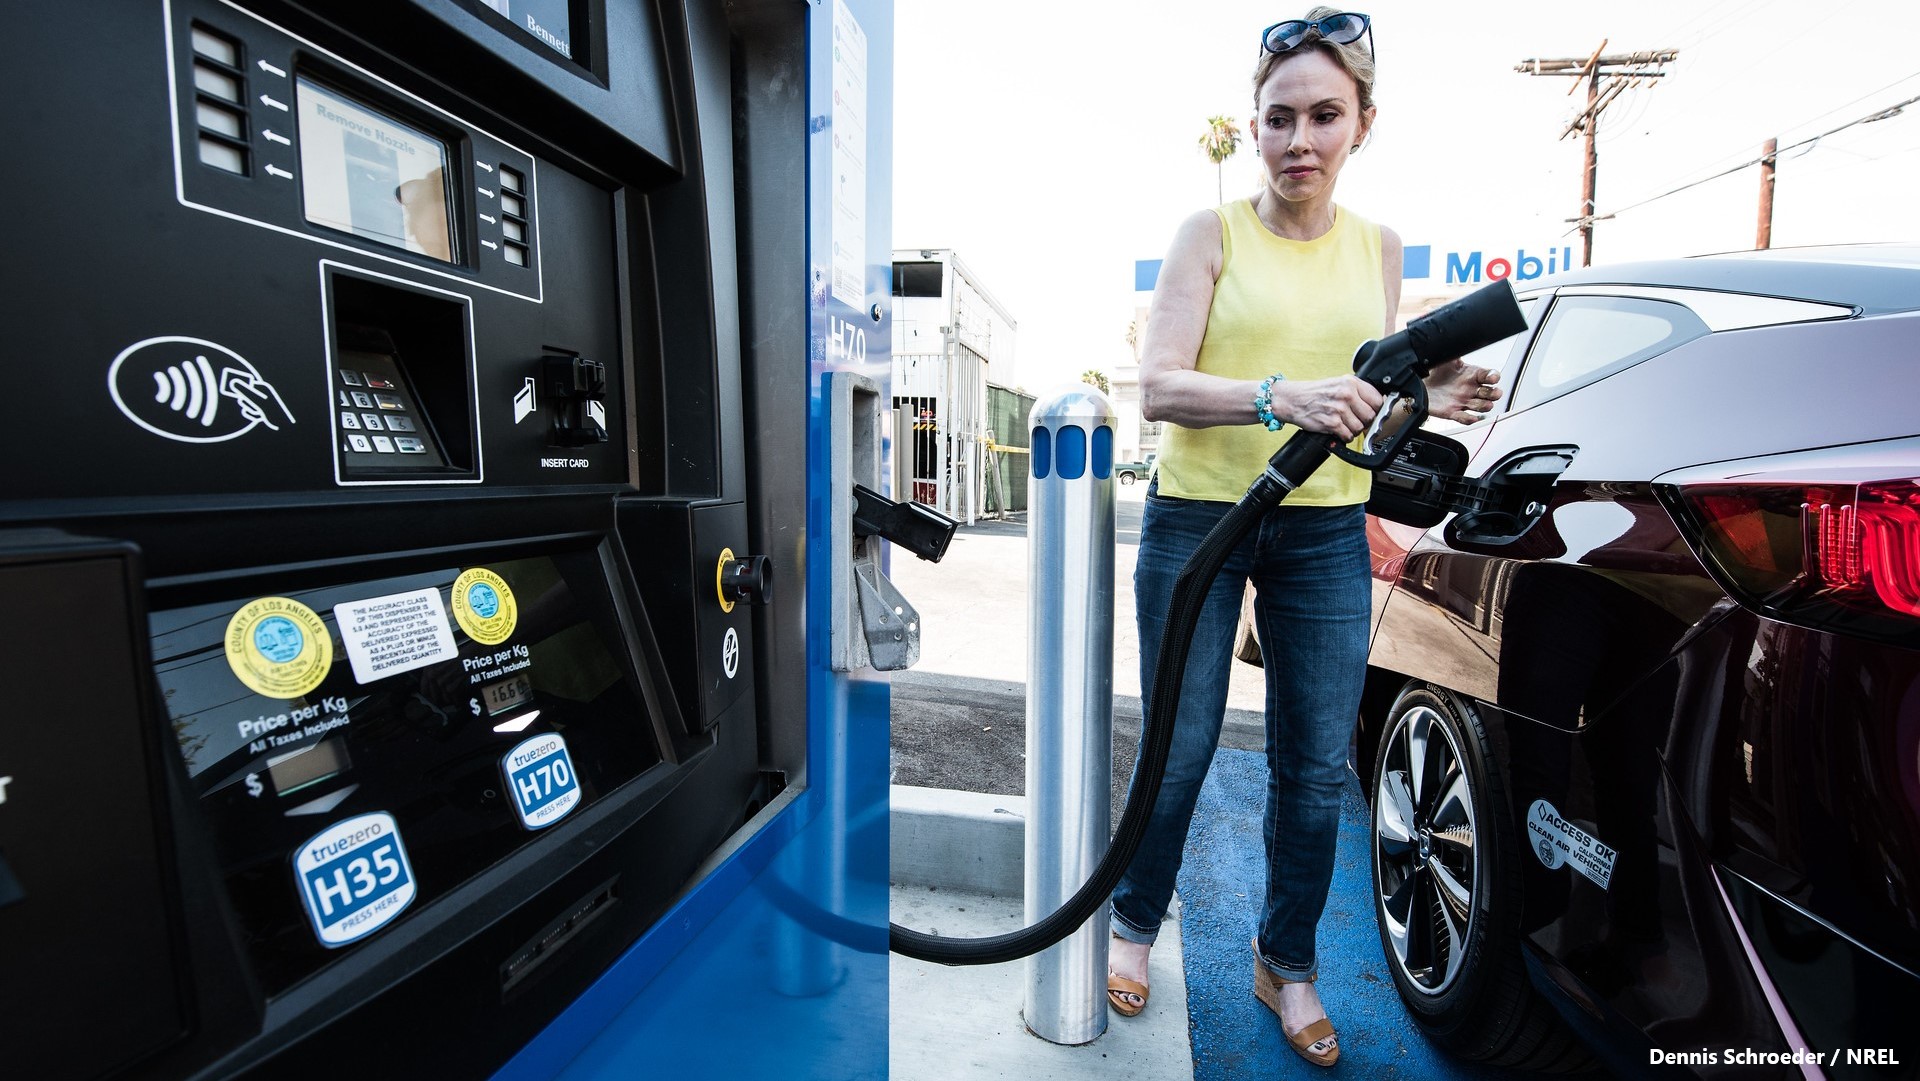 Anca Faur fuels her Honda Clarity FCEV fuel cell vehicle at a hydrogen fueling station in Hollywood, California. She is taking part in the California Fuel Cell Partnership to move fuel cell electric vehicles closer to market.